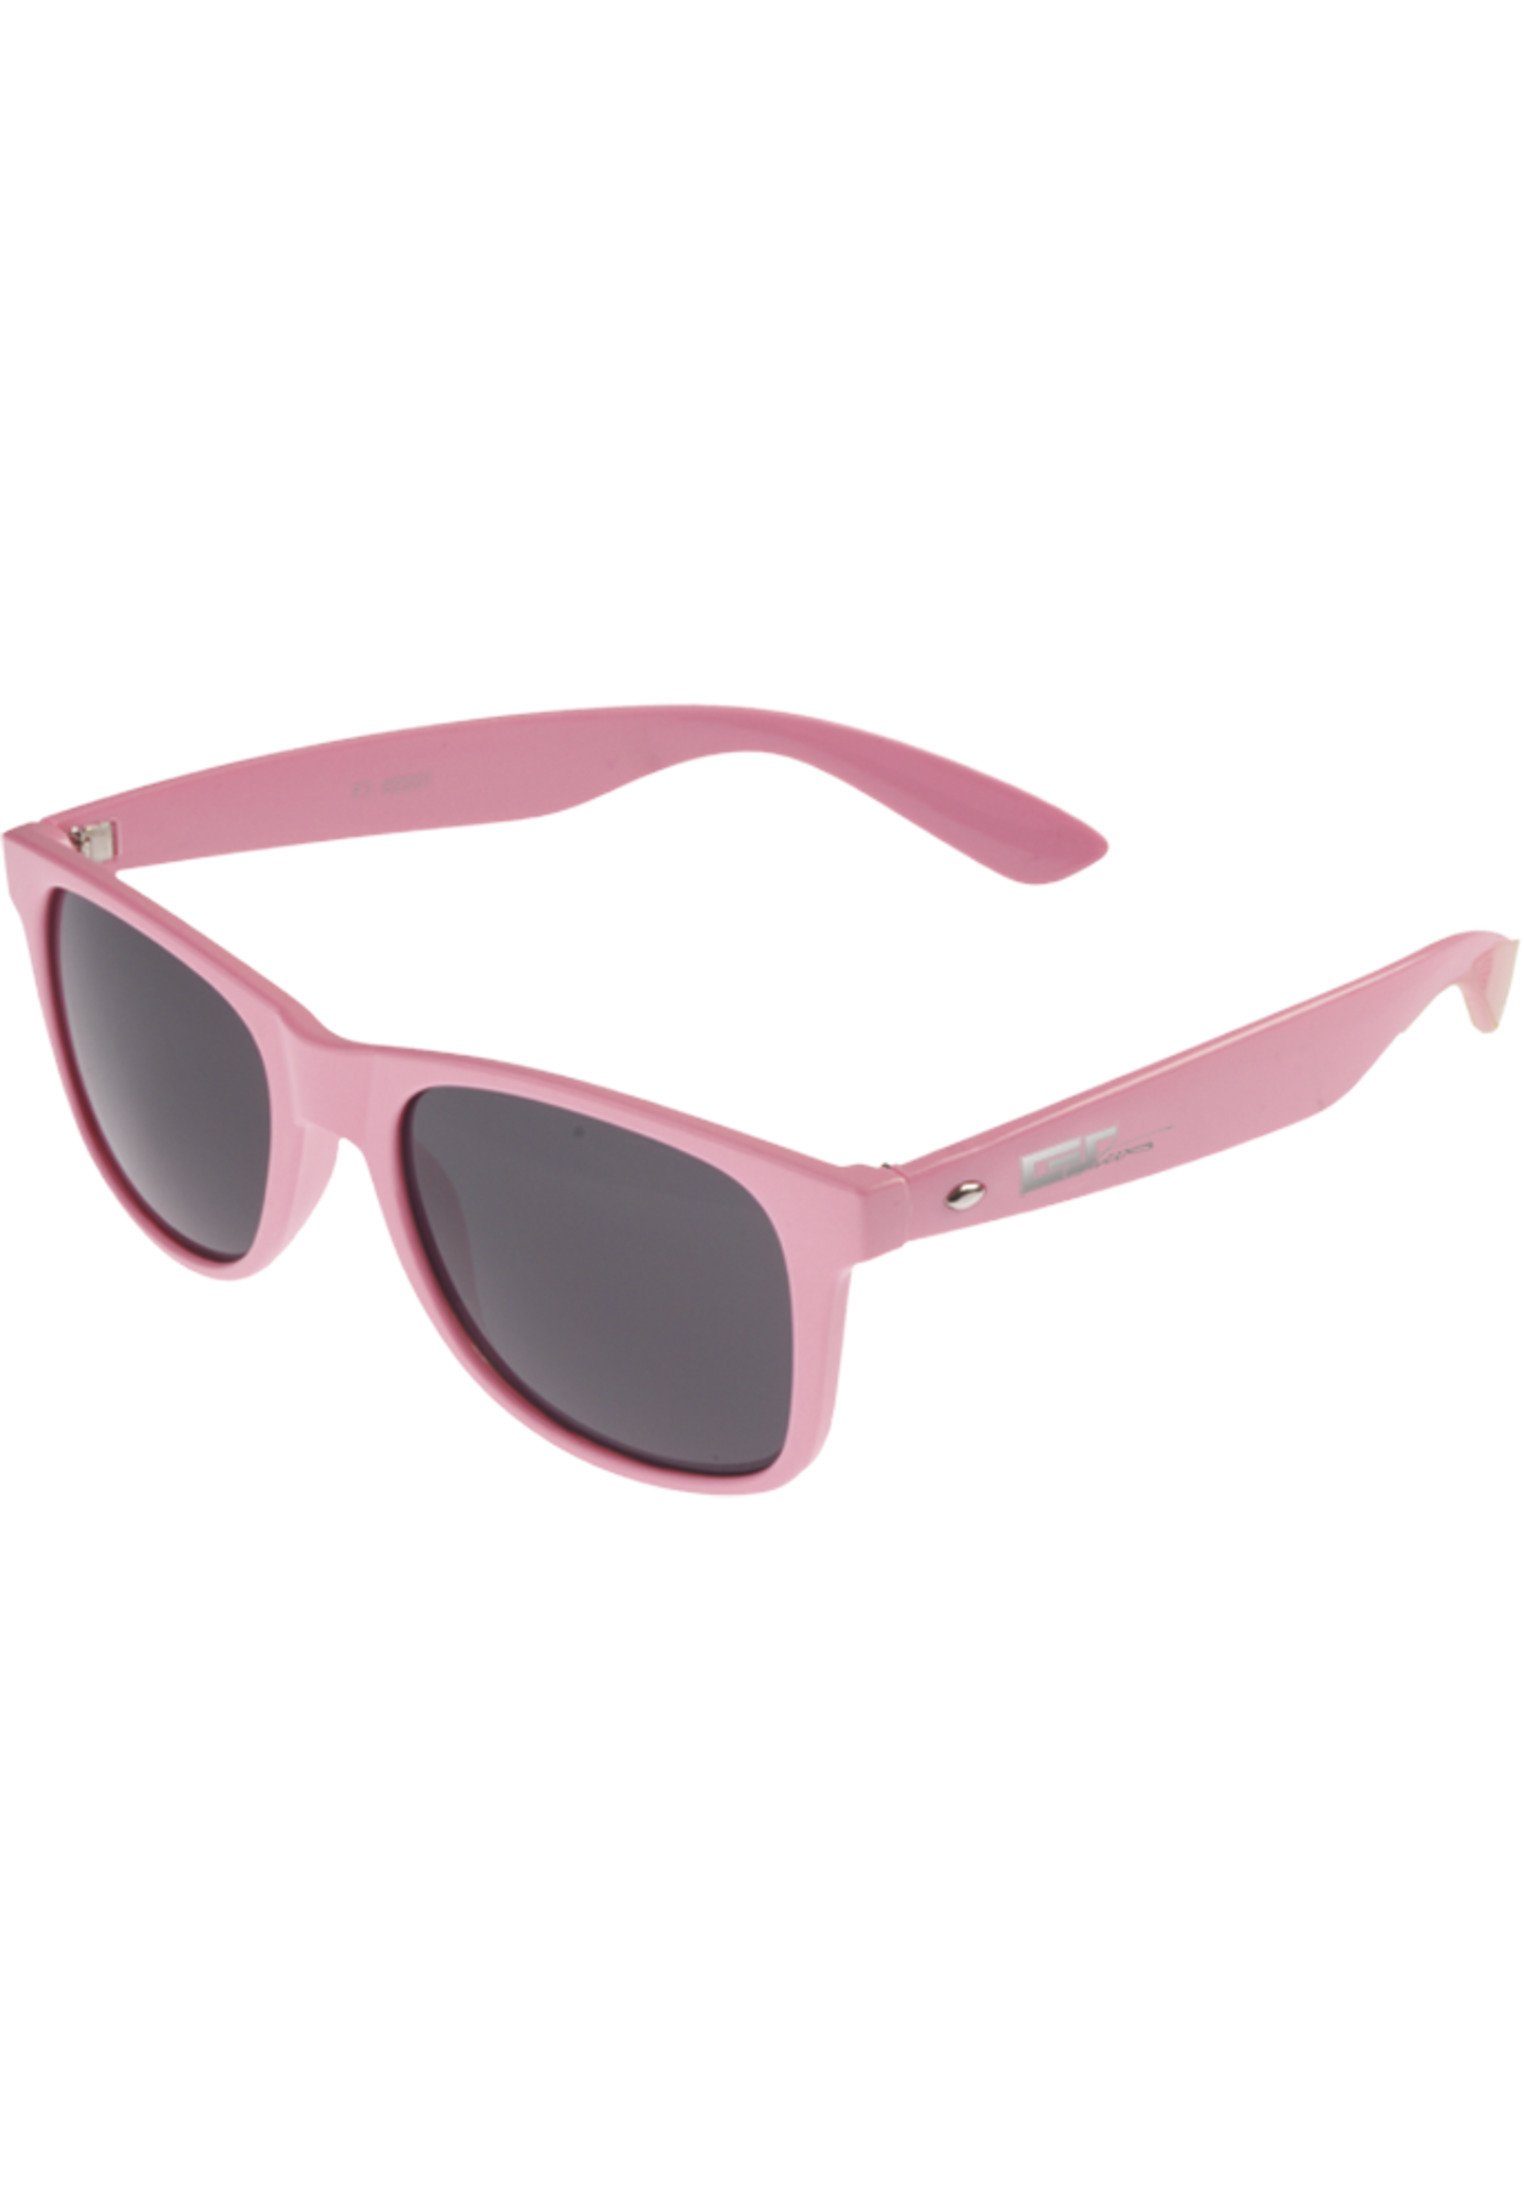 neonpink Accessoires MSTRDS Groove Shades GStwo Sonnenbrille